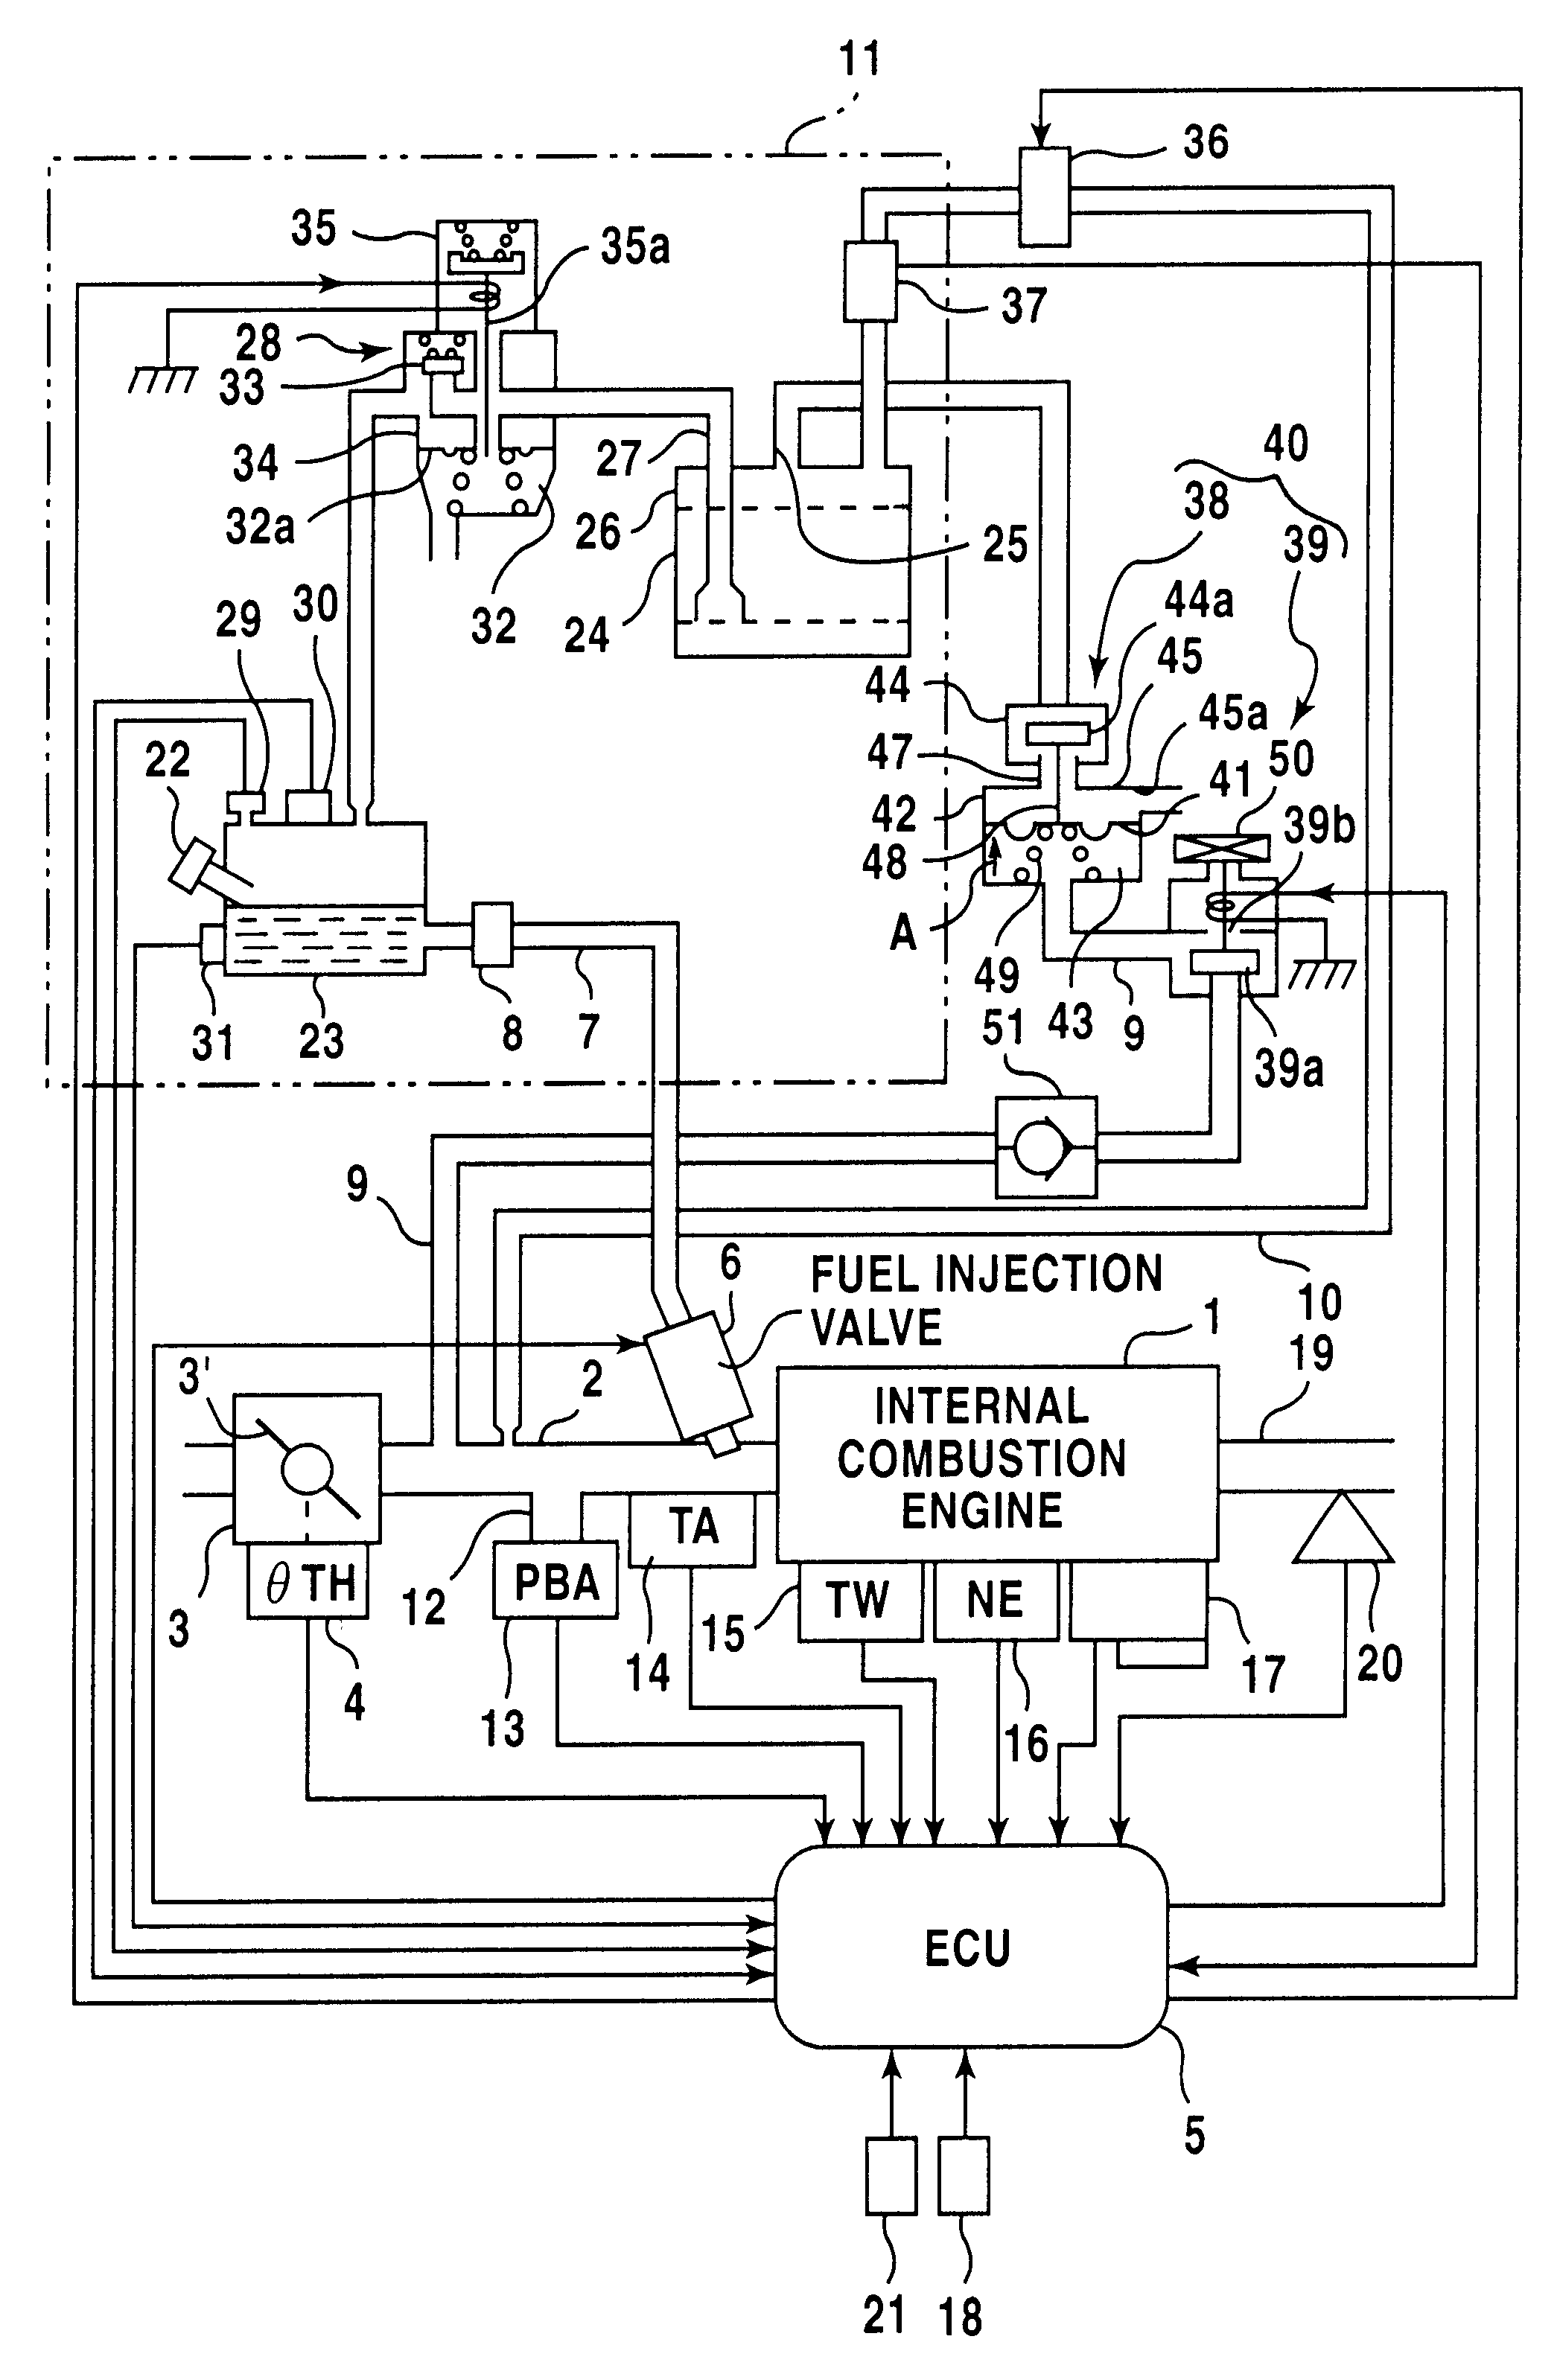 Evaporative fuel-processing system for internal combustion engines